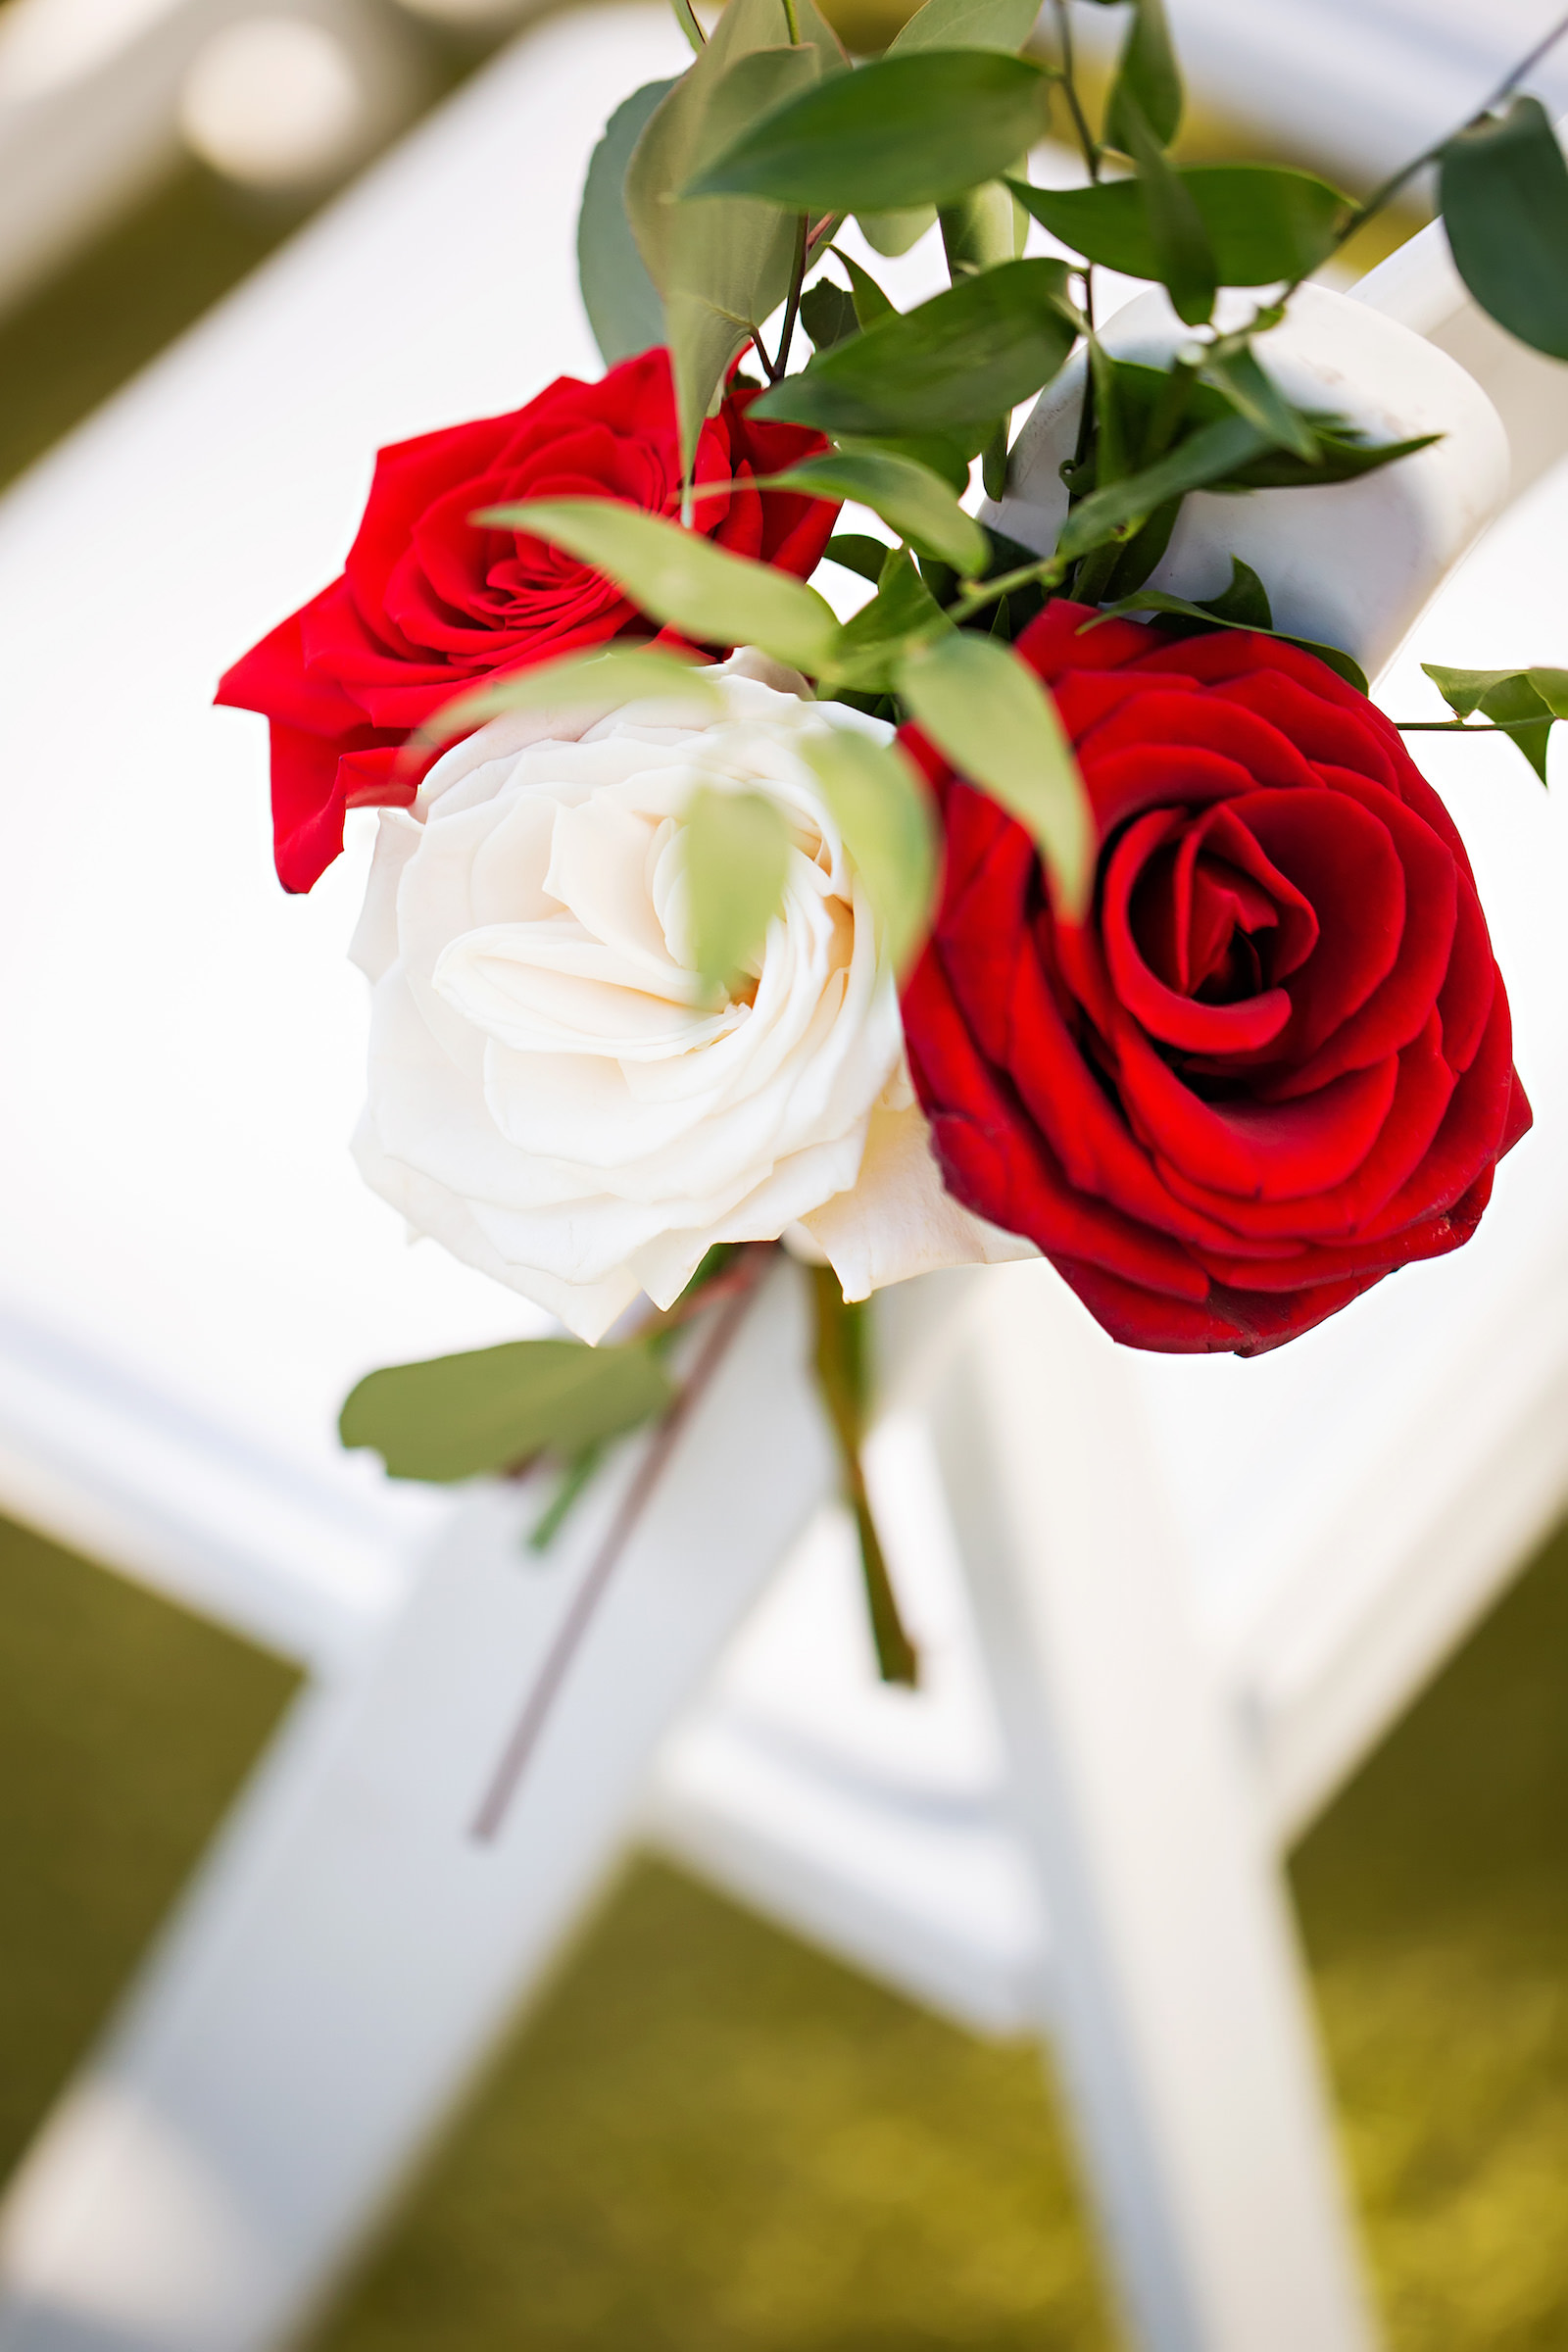 White and Red Rose Detailing for Florida Hotel Wedding Ceremony | Florida Planner Elegant Affairs by Design | Clearwater Florist Save the Date Florida